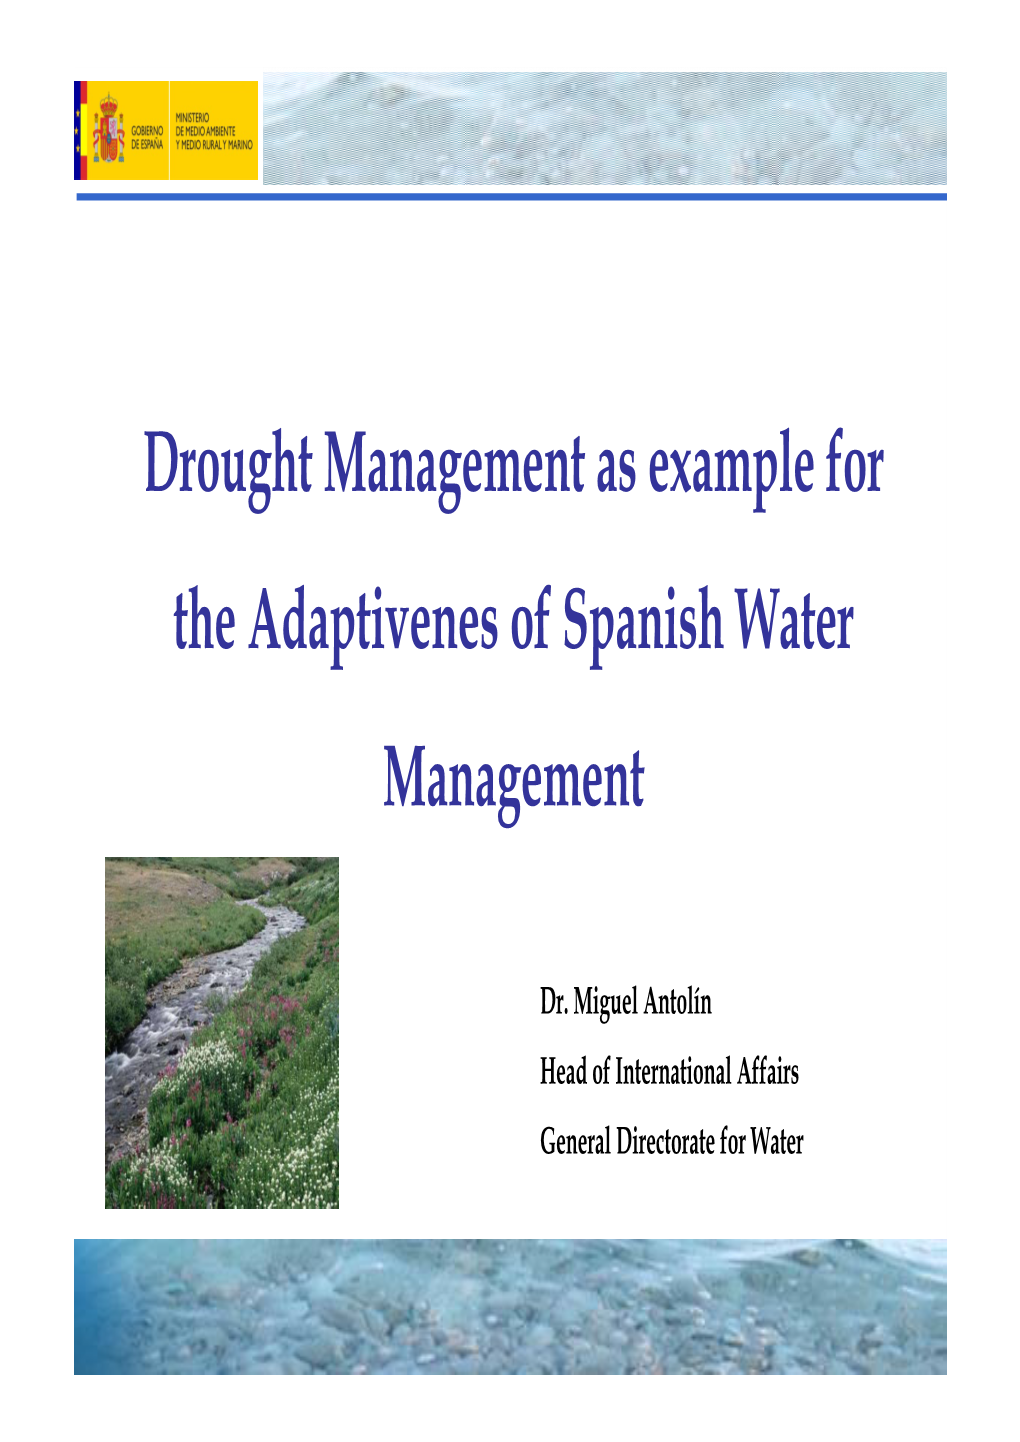 Drought Management As Example for the Adaptivenes of Spanish Water Management